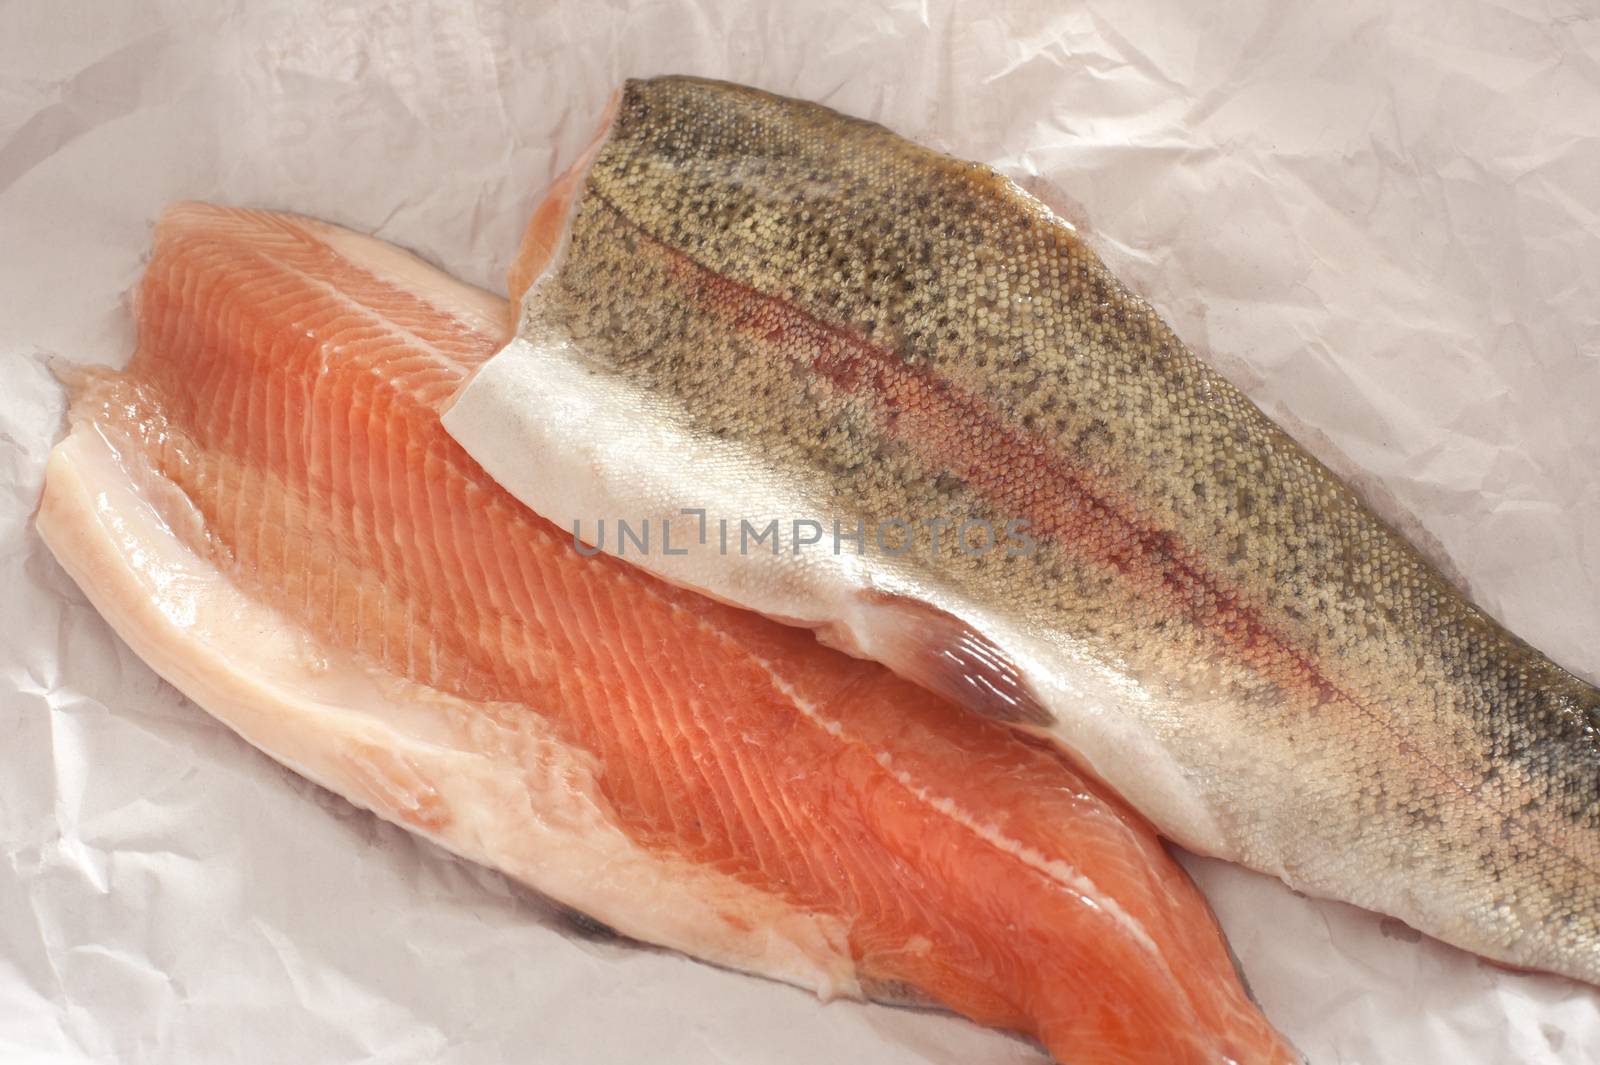 Two fresh rainbow trout fillets, one flesh side up and one skin side up, on greaseproof paper ready to be cooked for a healthy seafood dinner